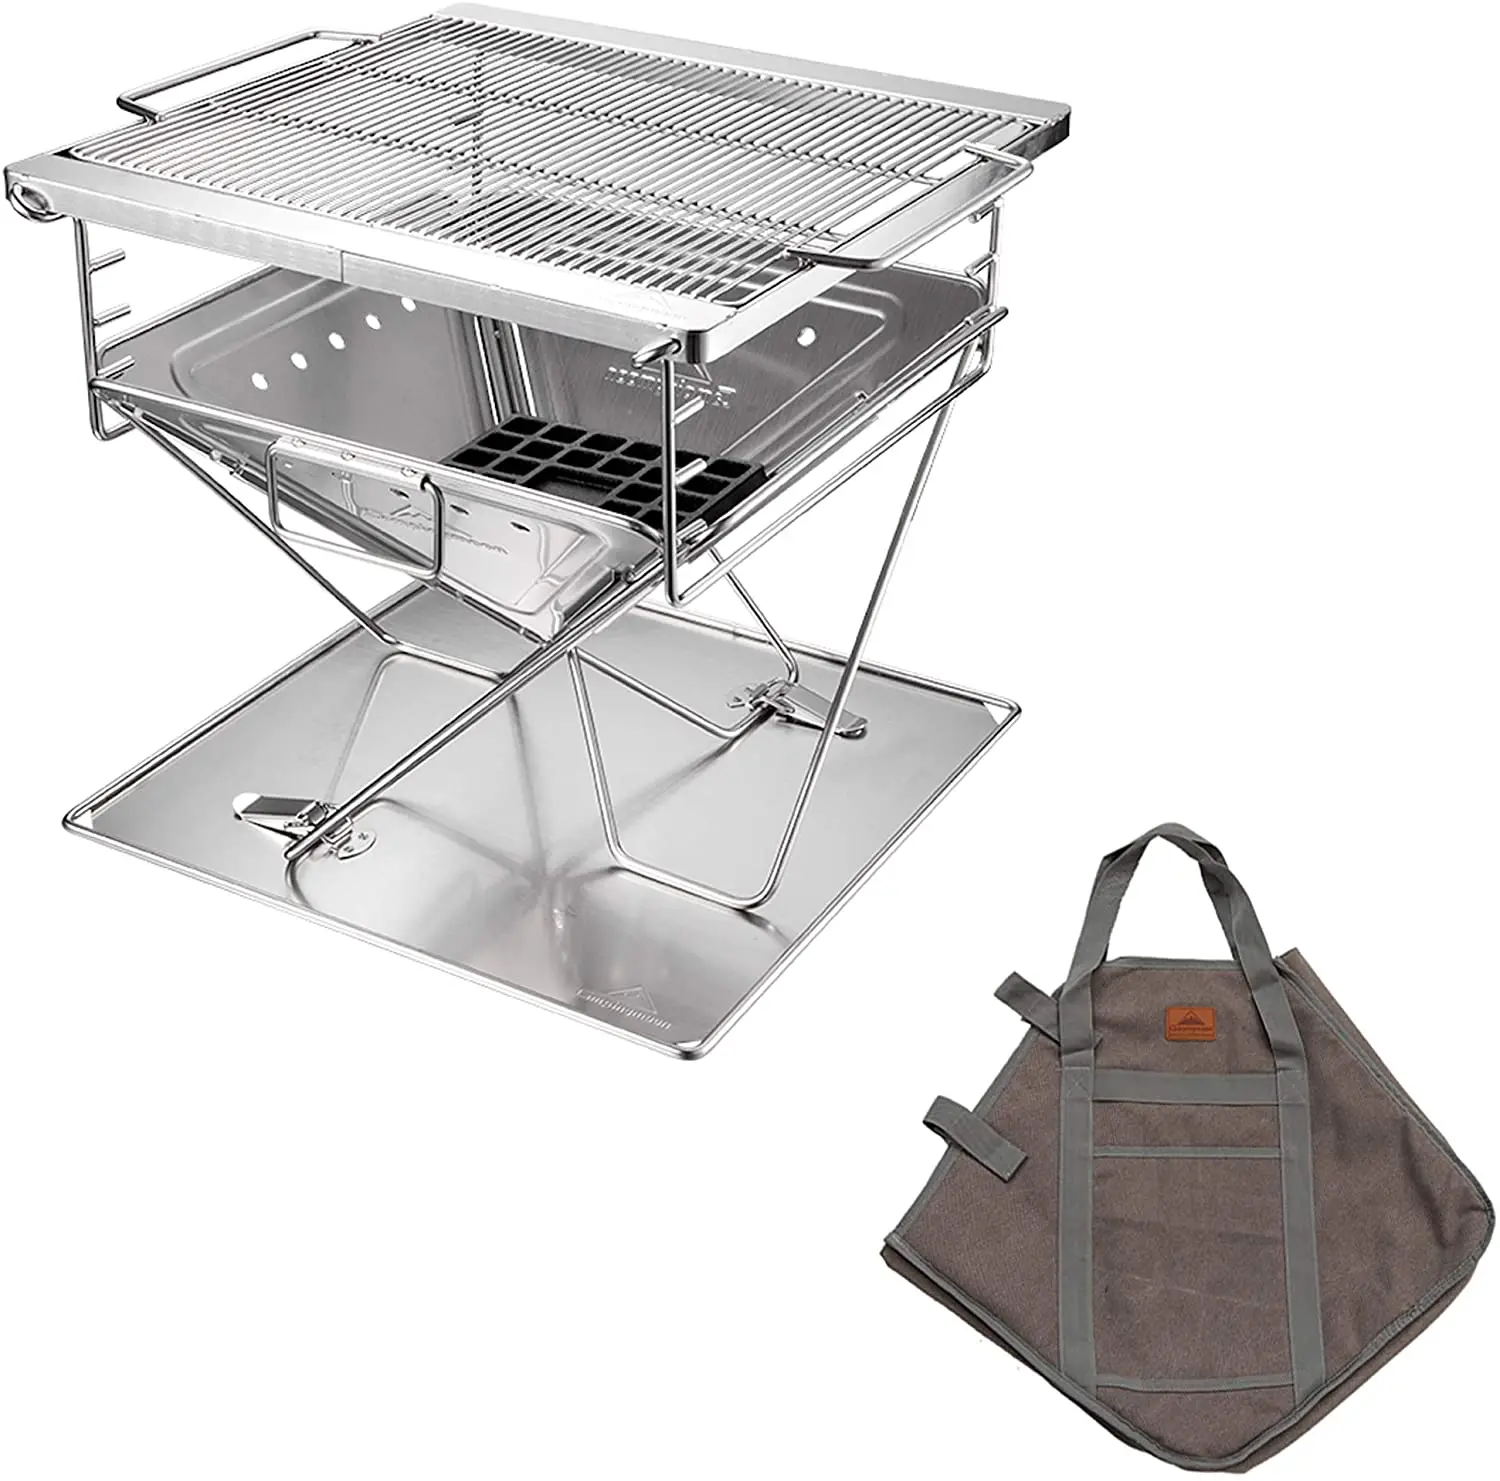 

High Quality Outdoor Camping Maximum size Folding Stainless Steel Charcoal BBQ Grill BBQ Barbecue oven Incinerator